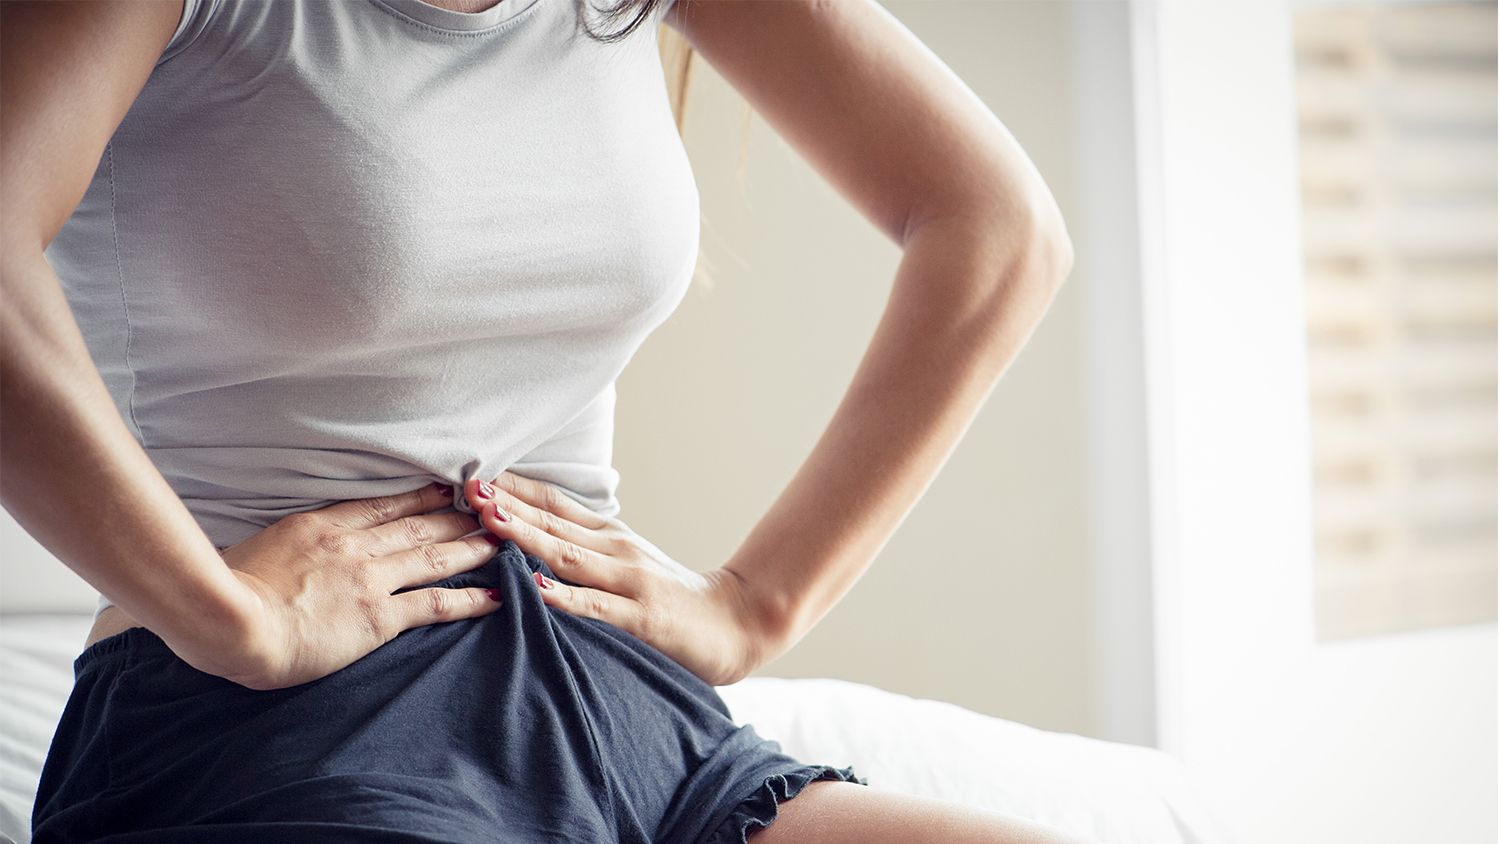 Large Breasts and Back Pain Sometimes Go Hand in Hand // Dr. Lisa